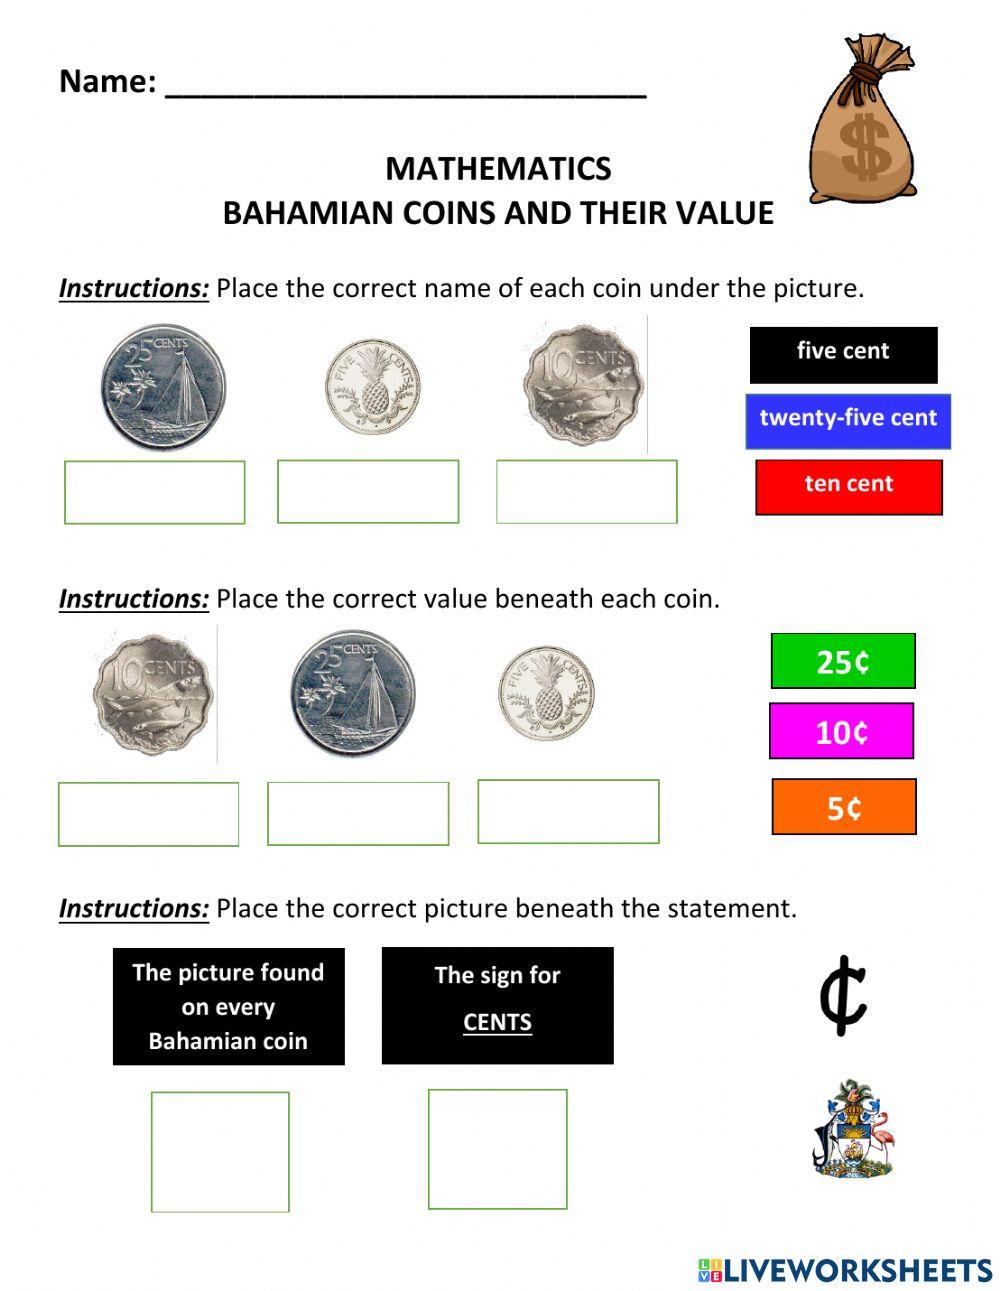 Bahamian Coins and their Values